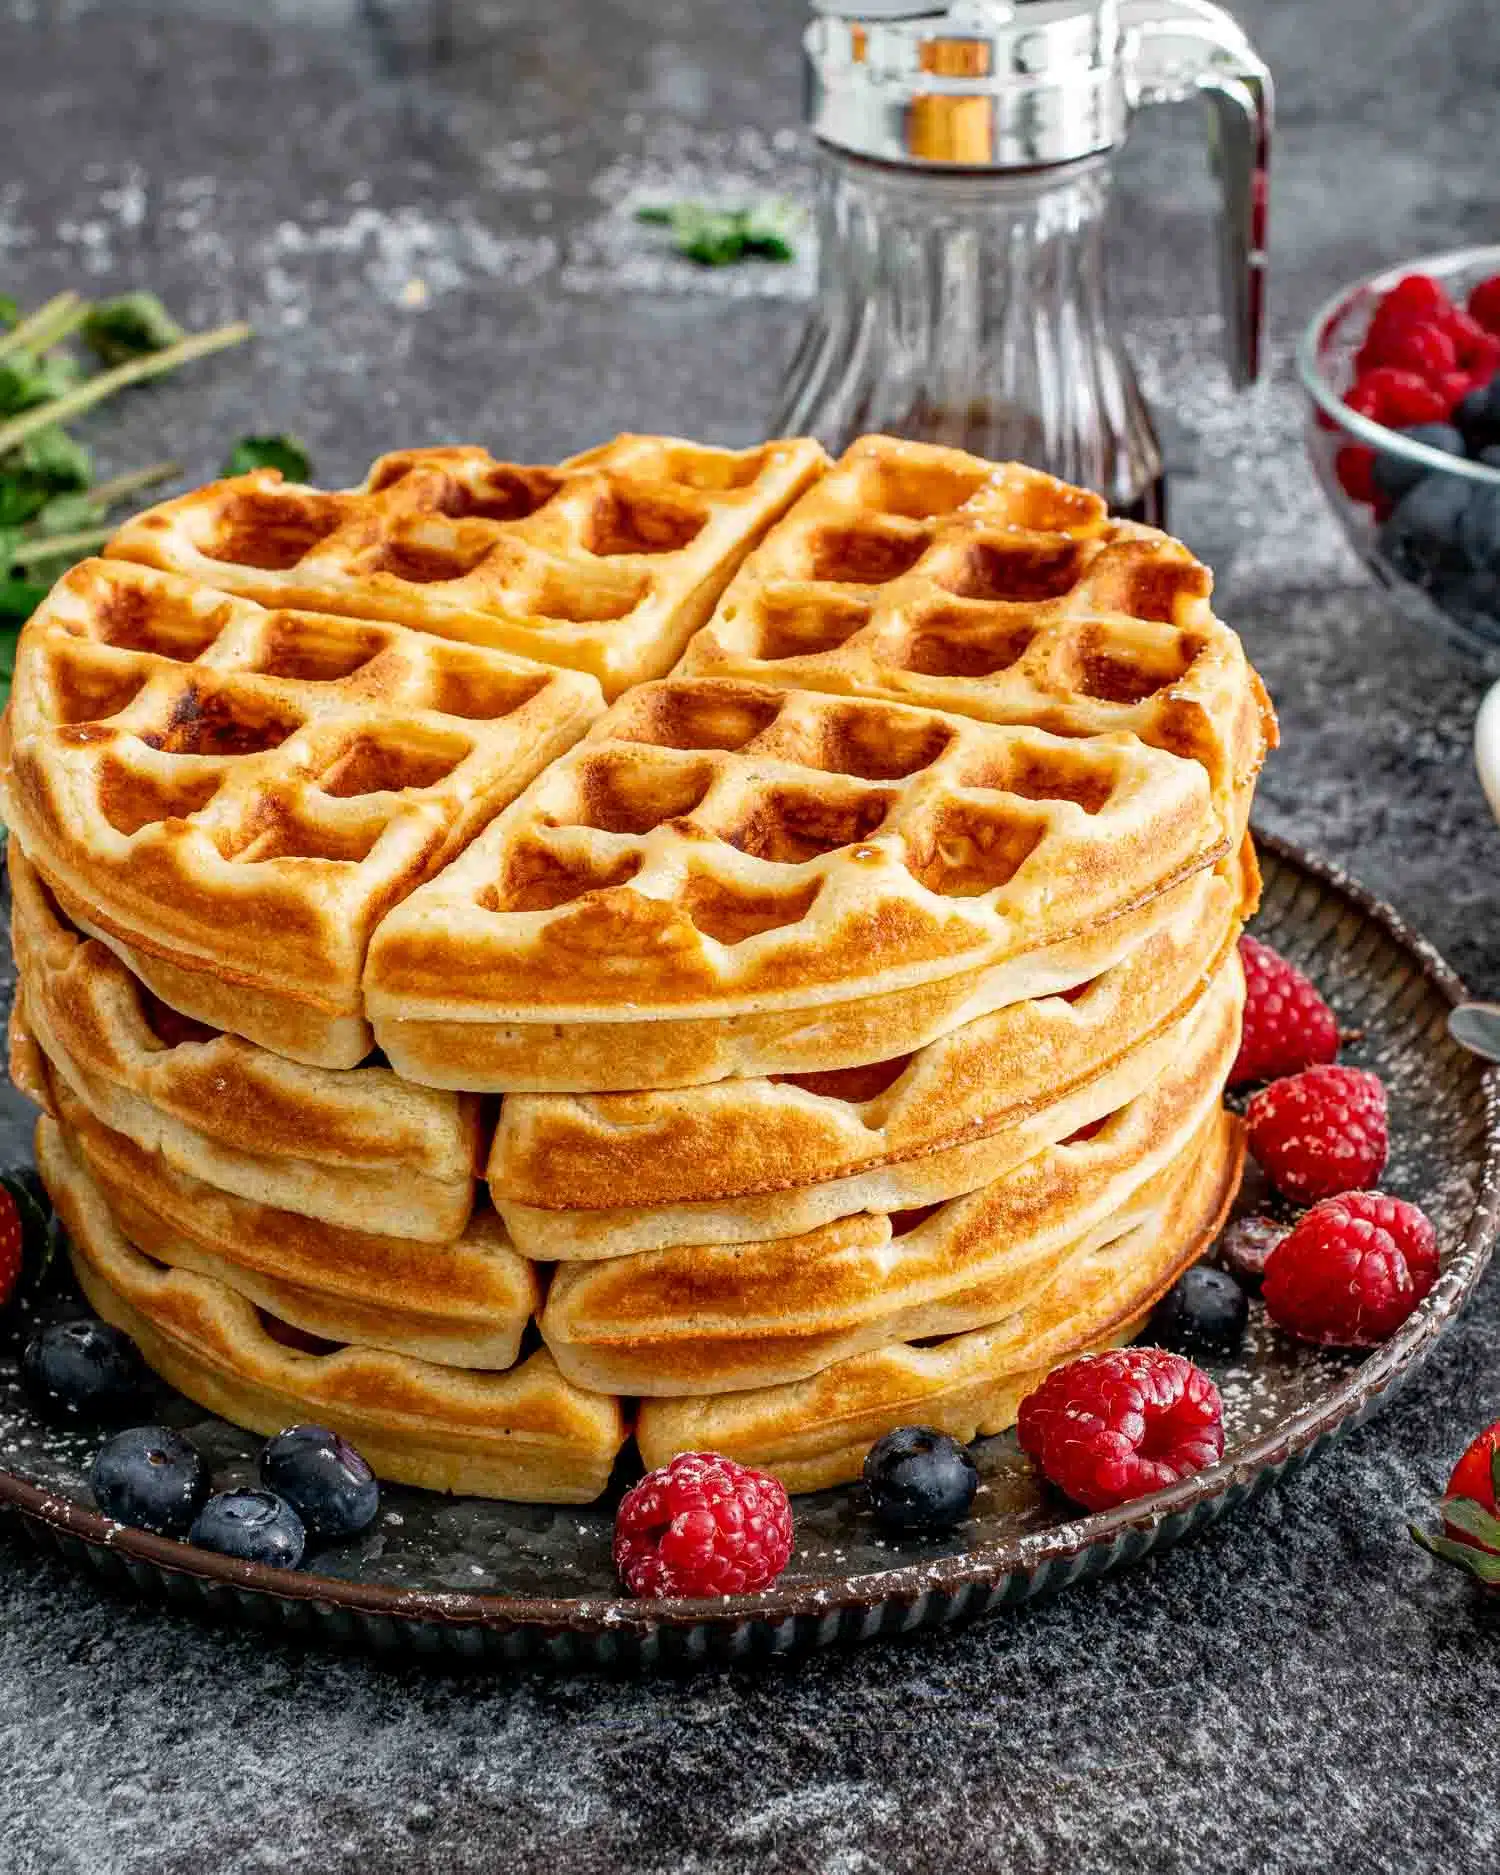 a stack of waffles on a metal plate surrounded by some berries.